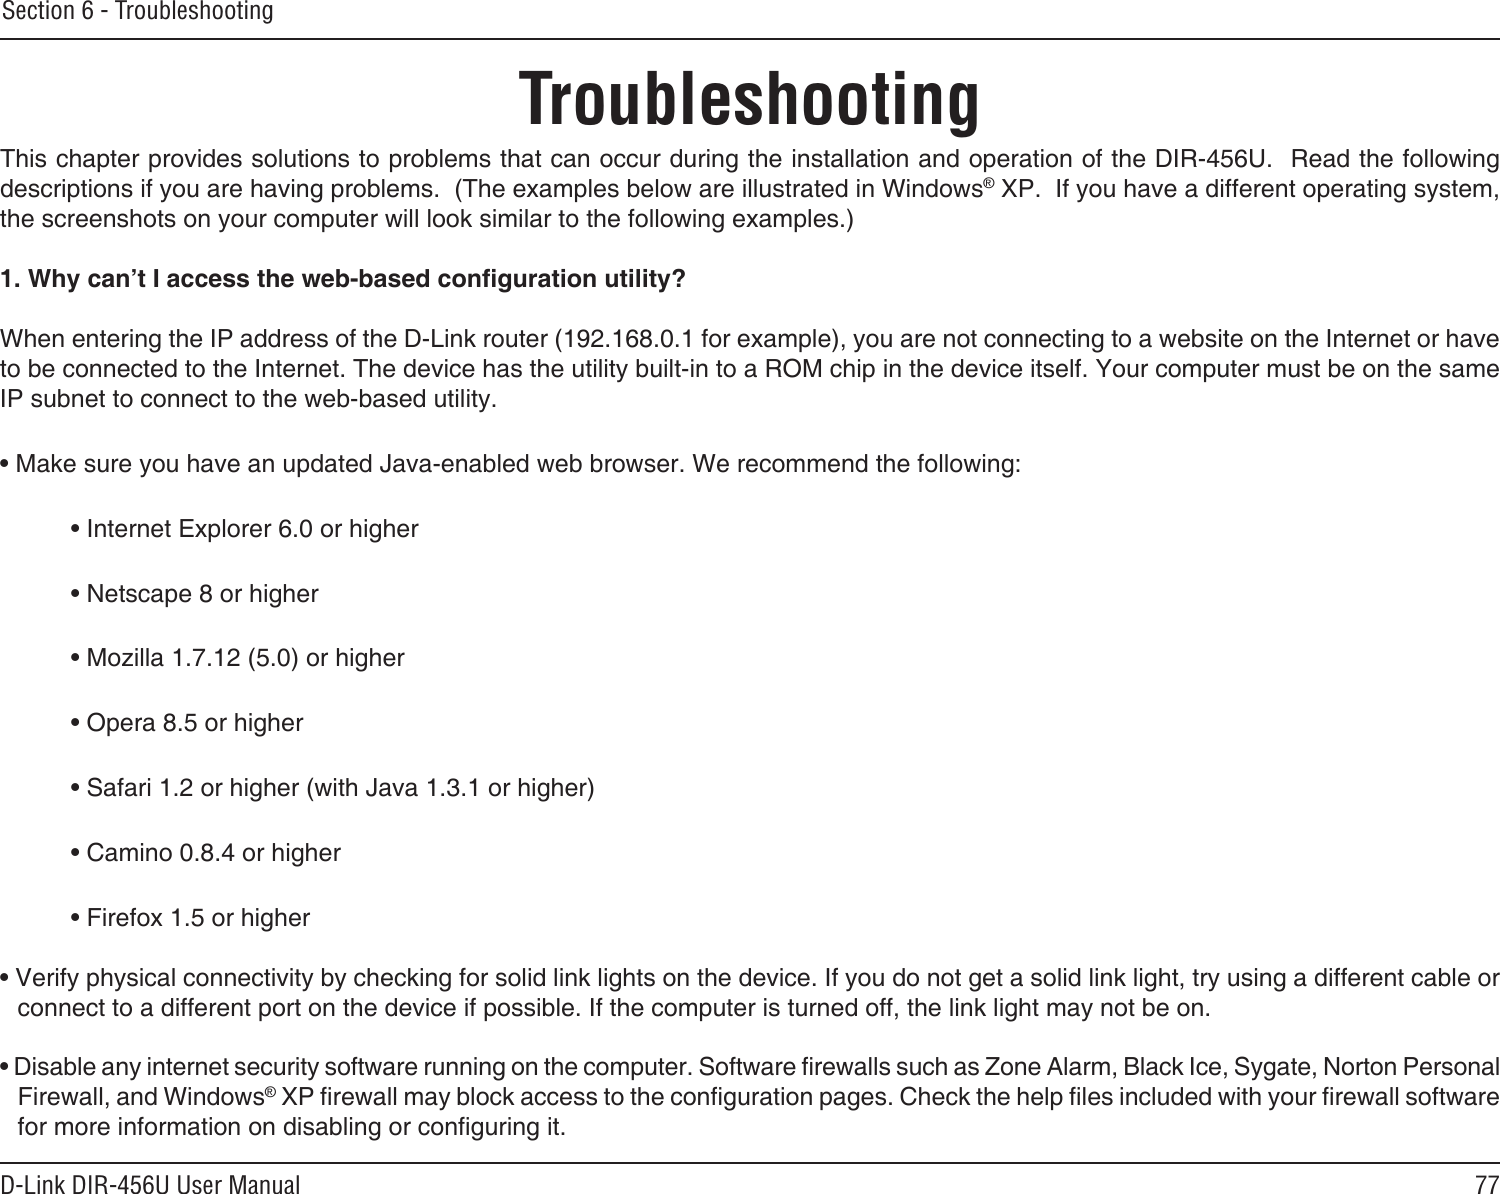 77D-Link DIR-456U User ManualSection 6 - TroubleshootingTroubleshootingThis chapter provides solutions to problems that can occur during the installation and operation of the DIR-456U.  Read the following descriptions if you are having problems.  (The examples below are illustrated in Windows® XP.  If you have a different operating system, the screenshots on your computer will look similar to the following examples.)1. Why can’t I access the web-based conguration utility?When entering the IP address of the D-Link router (192.168.0.1 for example), you are not connecting to a website on the Internet or have to be connected to the Internet. The device has the utility built-in to a ROM chip in the device itself. Your computer must be on the same IP subnet to connect to the web-based utility. • Make sure you have an updated Java-enabled web browser. We recommend the following: • Internet Explorer 6.0 or higher • Netscape 8 or higher • Mozilla 1.7.12 (5.0) or higher • Opera 8.5 or higher • Safari 1.2 or higher (with Java 1.3.1 or higher) • Camino 0.8.4 or higher • Firefox 1.5 or higher • Verify physical connectivity by checking for solid link lights on the device. If you do not get a solid link light, try using a different cable or connect to a different port on the device if possible. If the computer is turned off, the link light may not be on.• Disable any internet security software running on the computer. Software rewalls such as Zone Alarm, Black Ice, Sygate, Norton Personal Firewall, and Windows® XP rewall may block access to the conguration pages. Check the help les included with your rewall software for more information on disabling or conguring it.